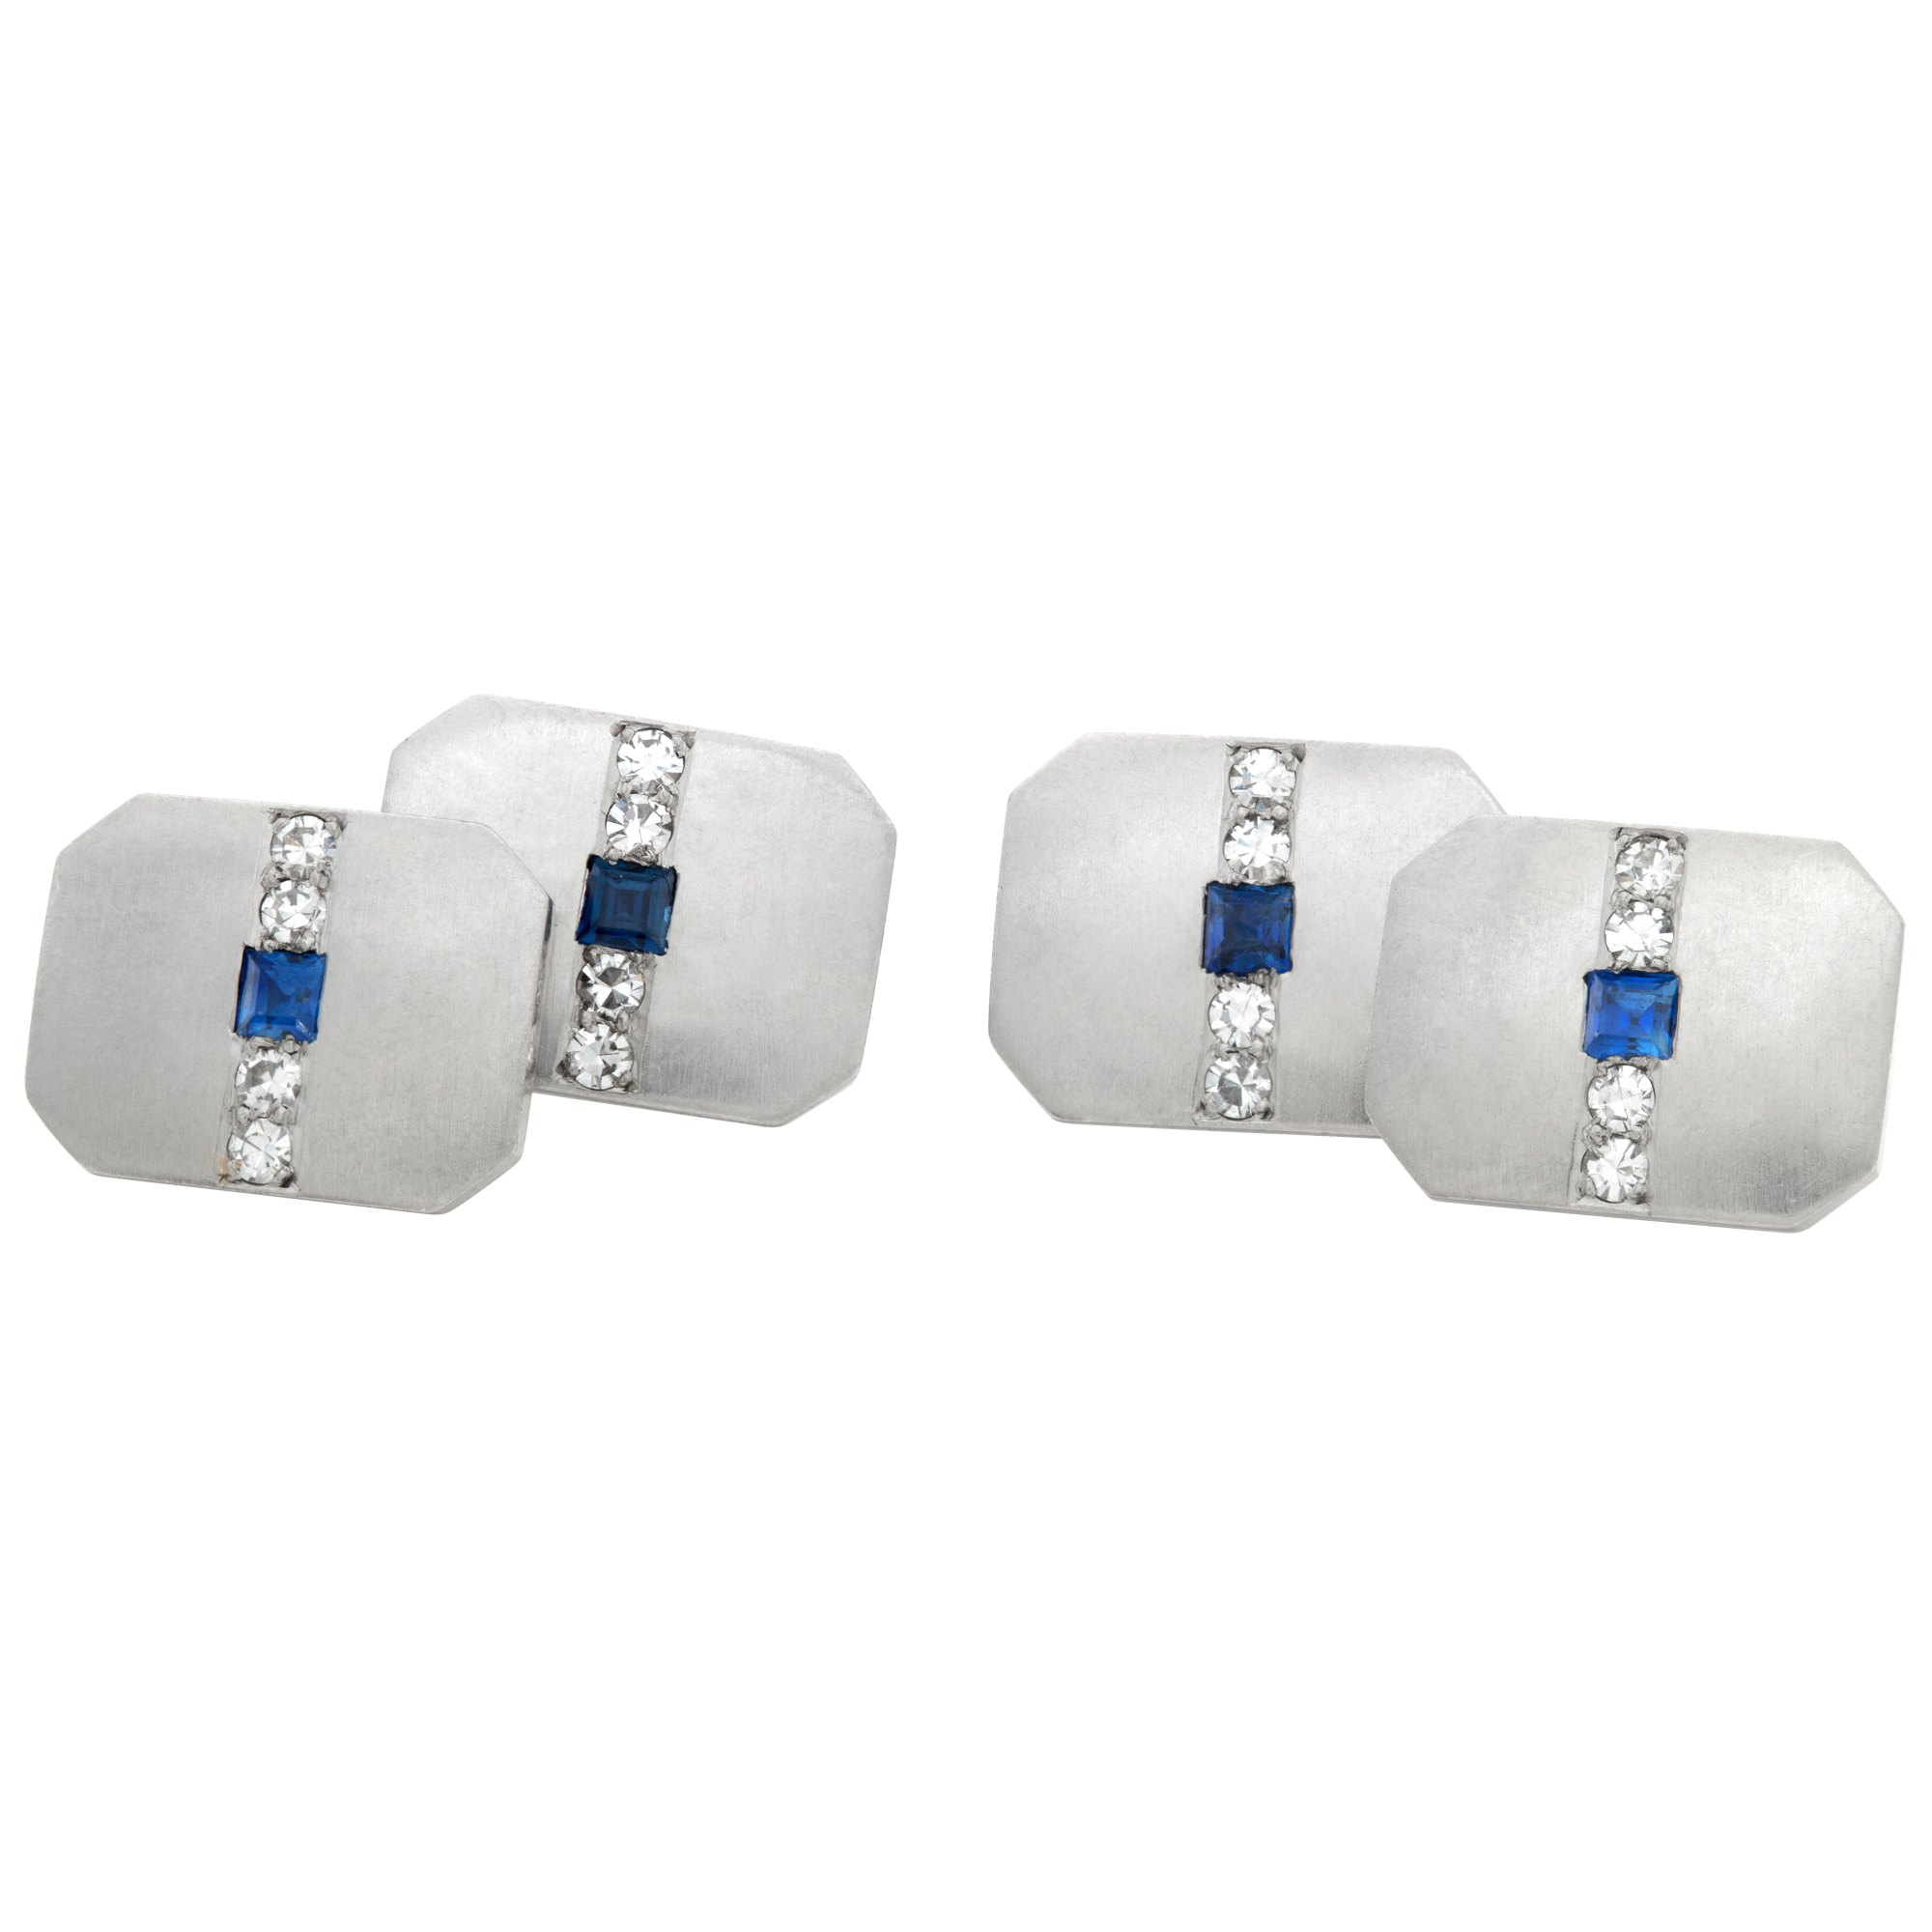 Platinum cufflinks with diamond and sapphire accents